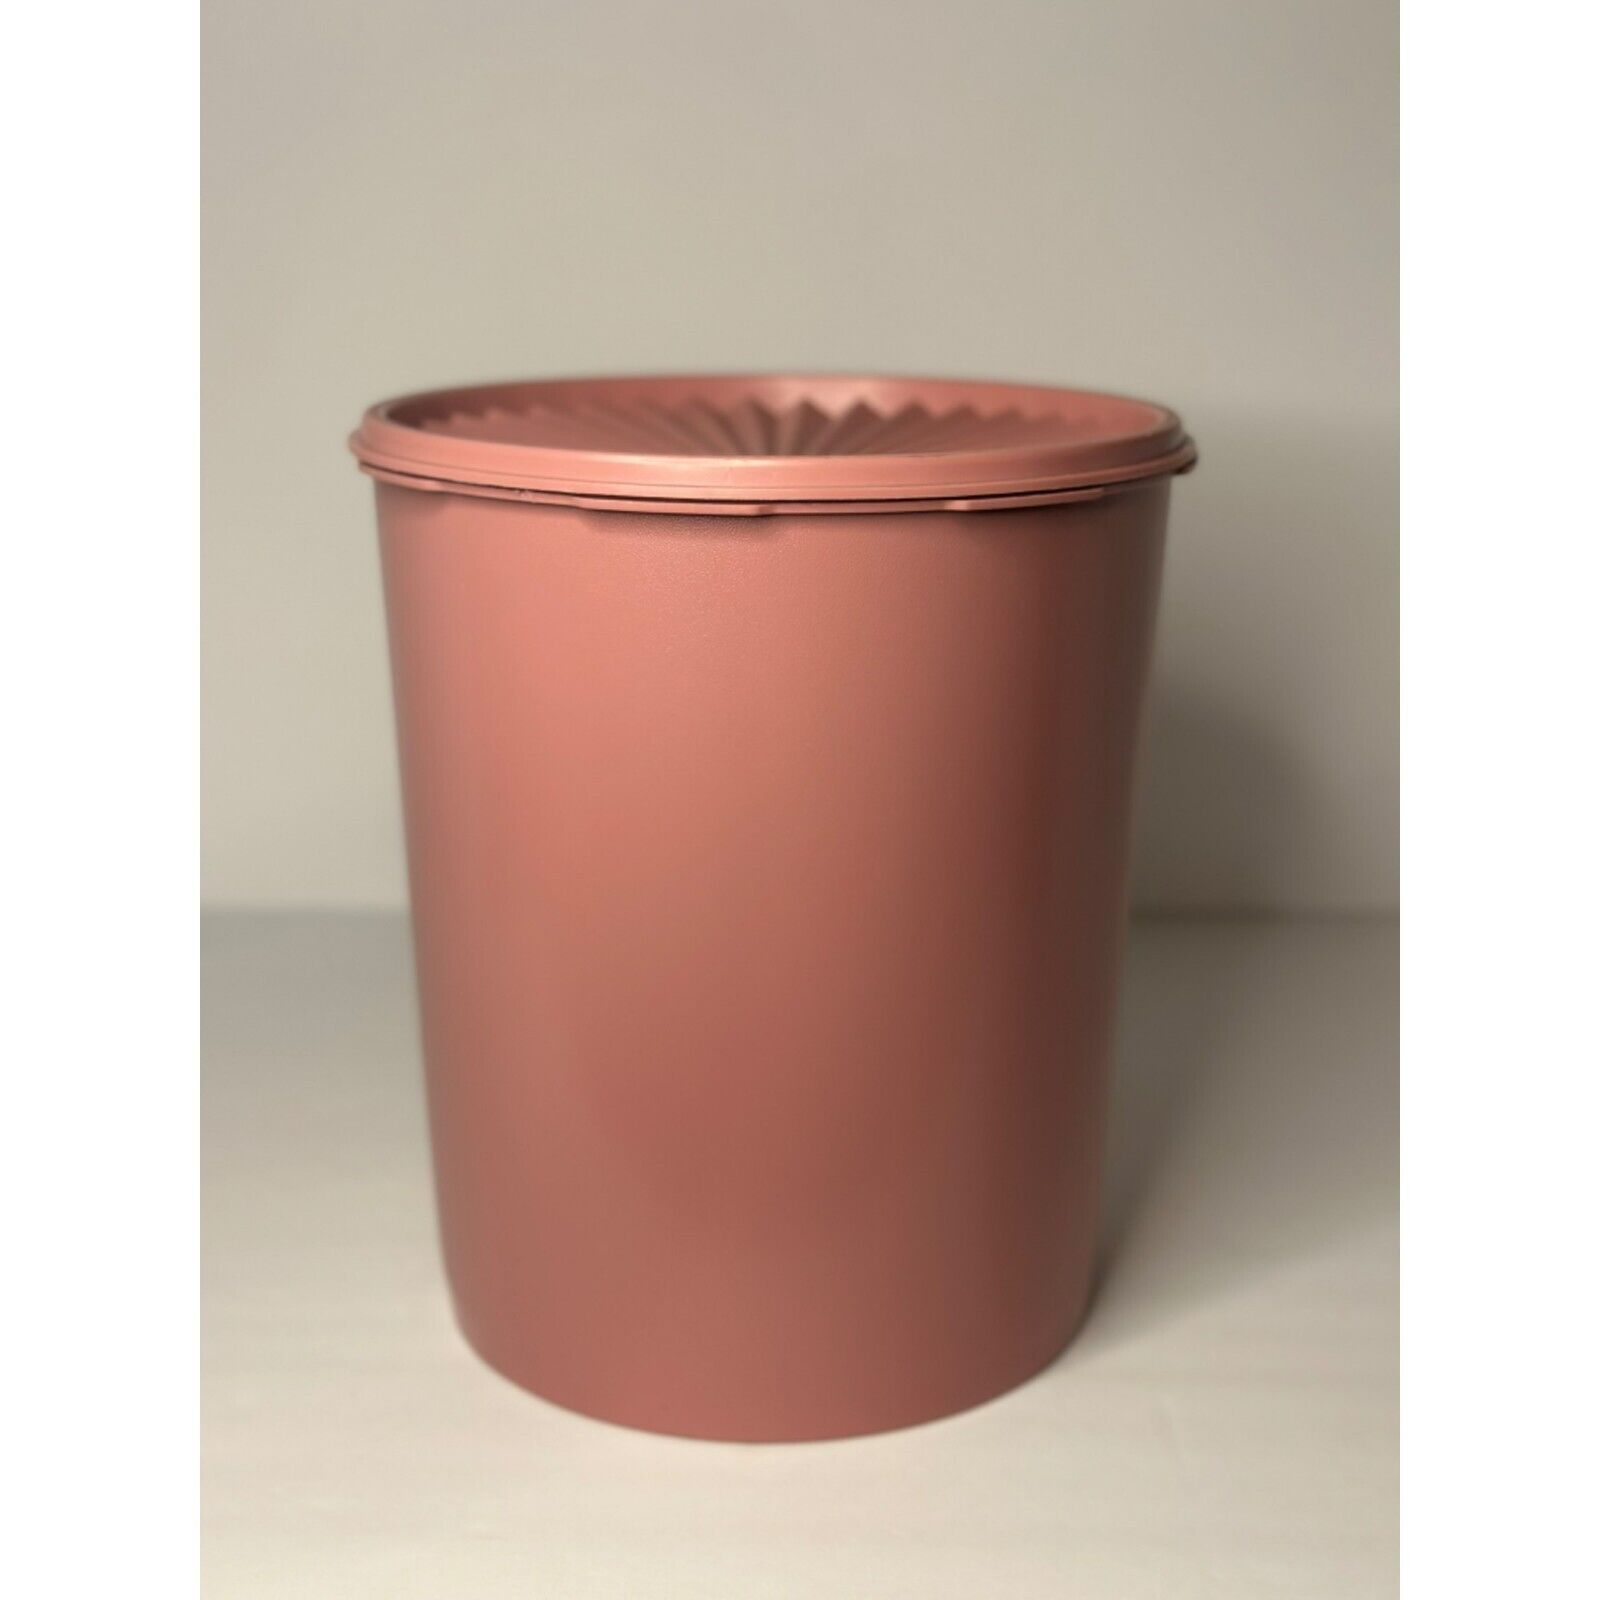 VTG Tupperware Pin Dusty Rose Mauve Pink Large Kitchen Storage Container #1339-3